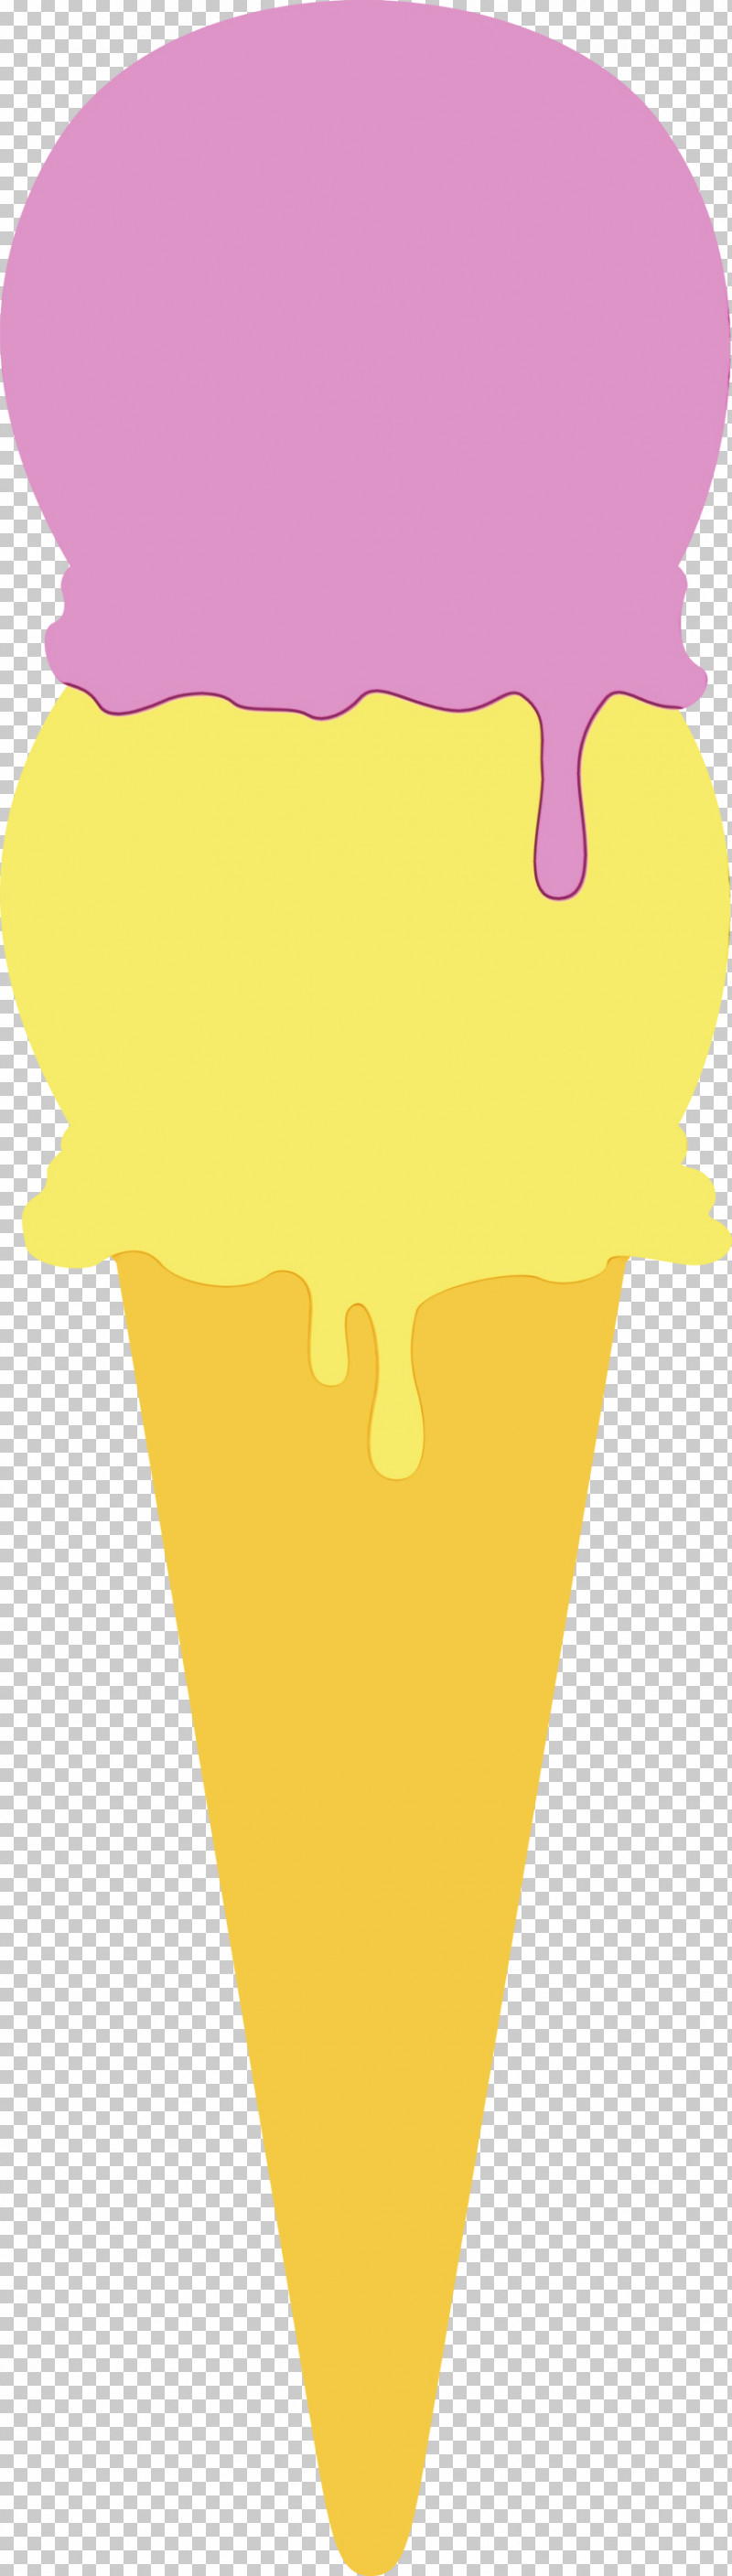 Ice Cream Cone Cartoon Yellow Line Violet PNG, Clipart, Cartoon, Cone, Geometry, Ice Cream, Ice Cream Cone Free PNG Download